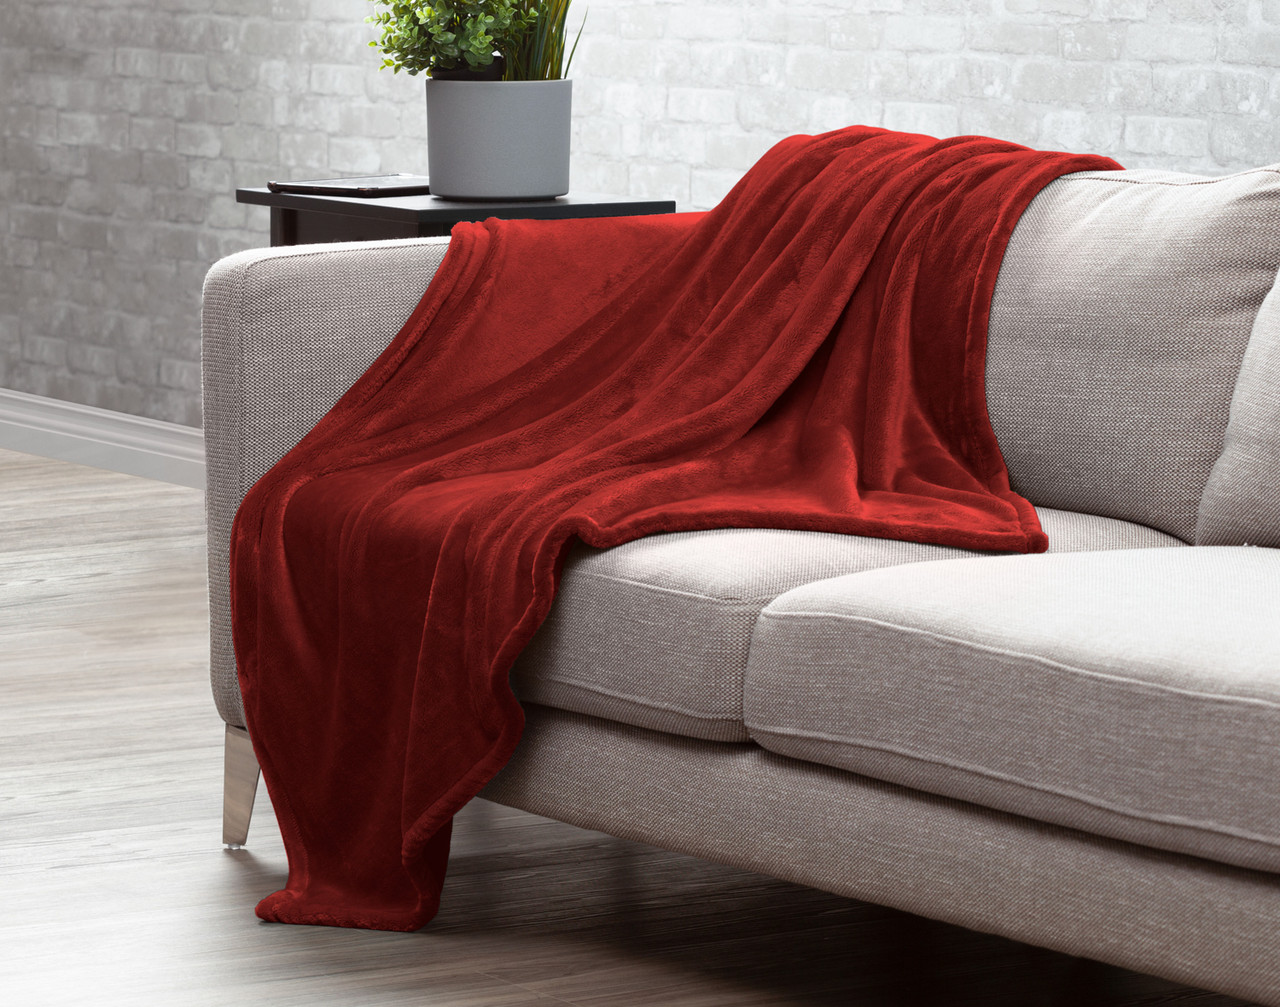 Our Merlot Red Velvet Plush Throw draped over a couch.